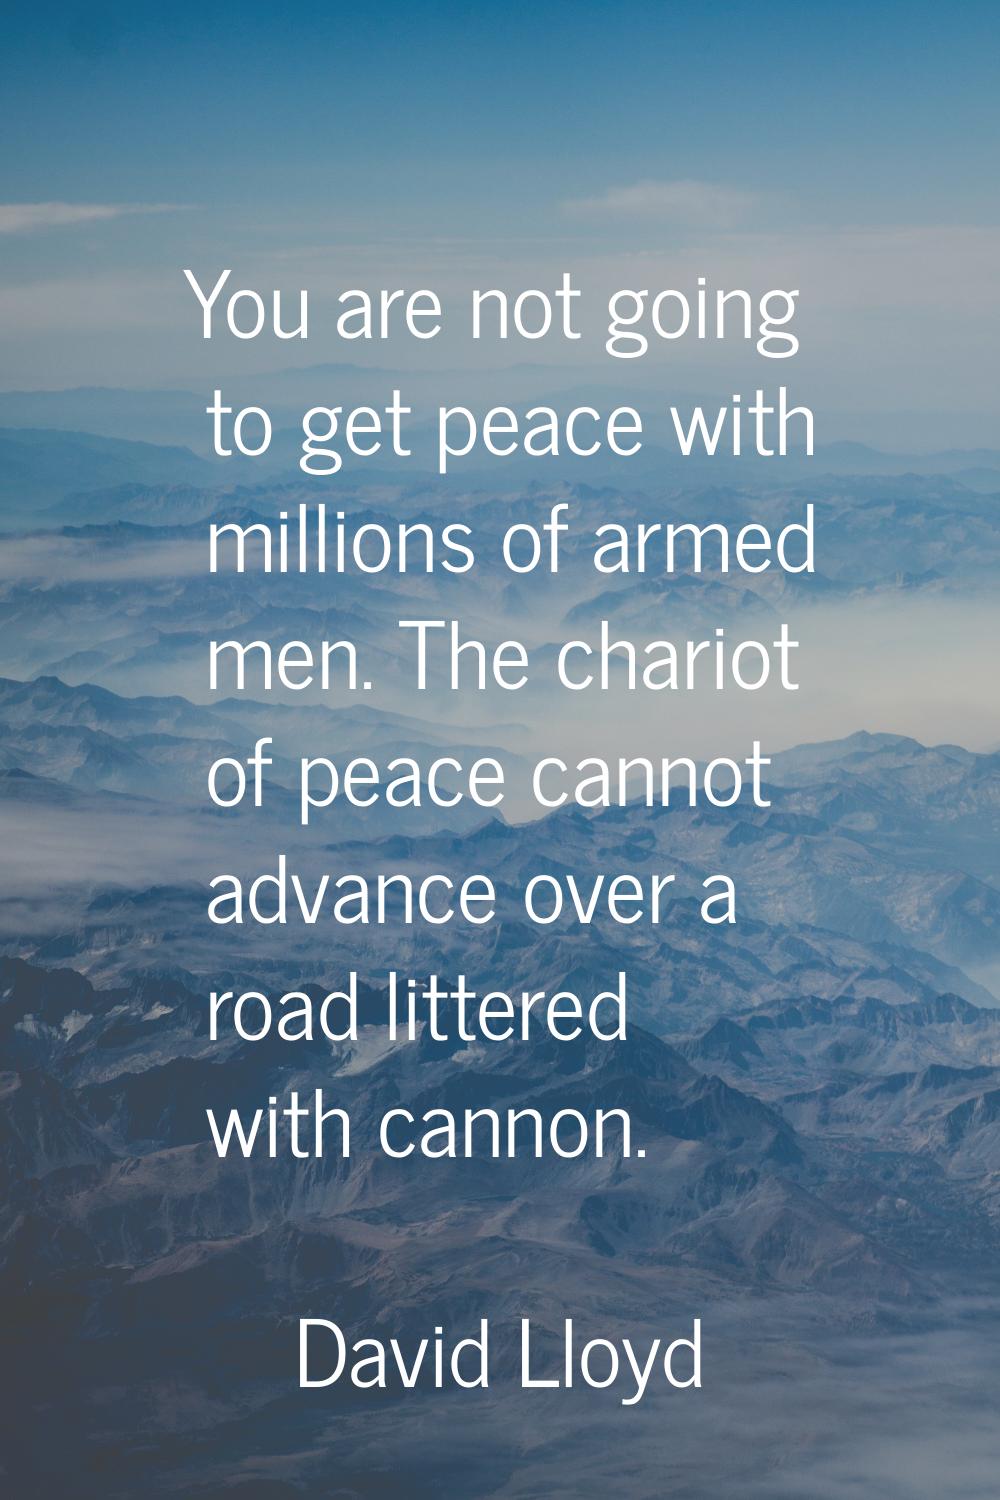 You are not going to get peace with millions of armed men. The chariot of peace cannot advance over